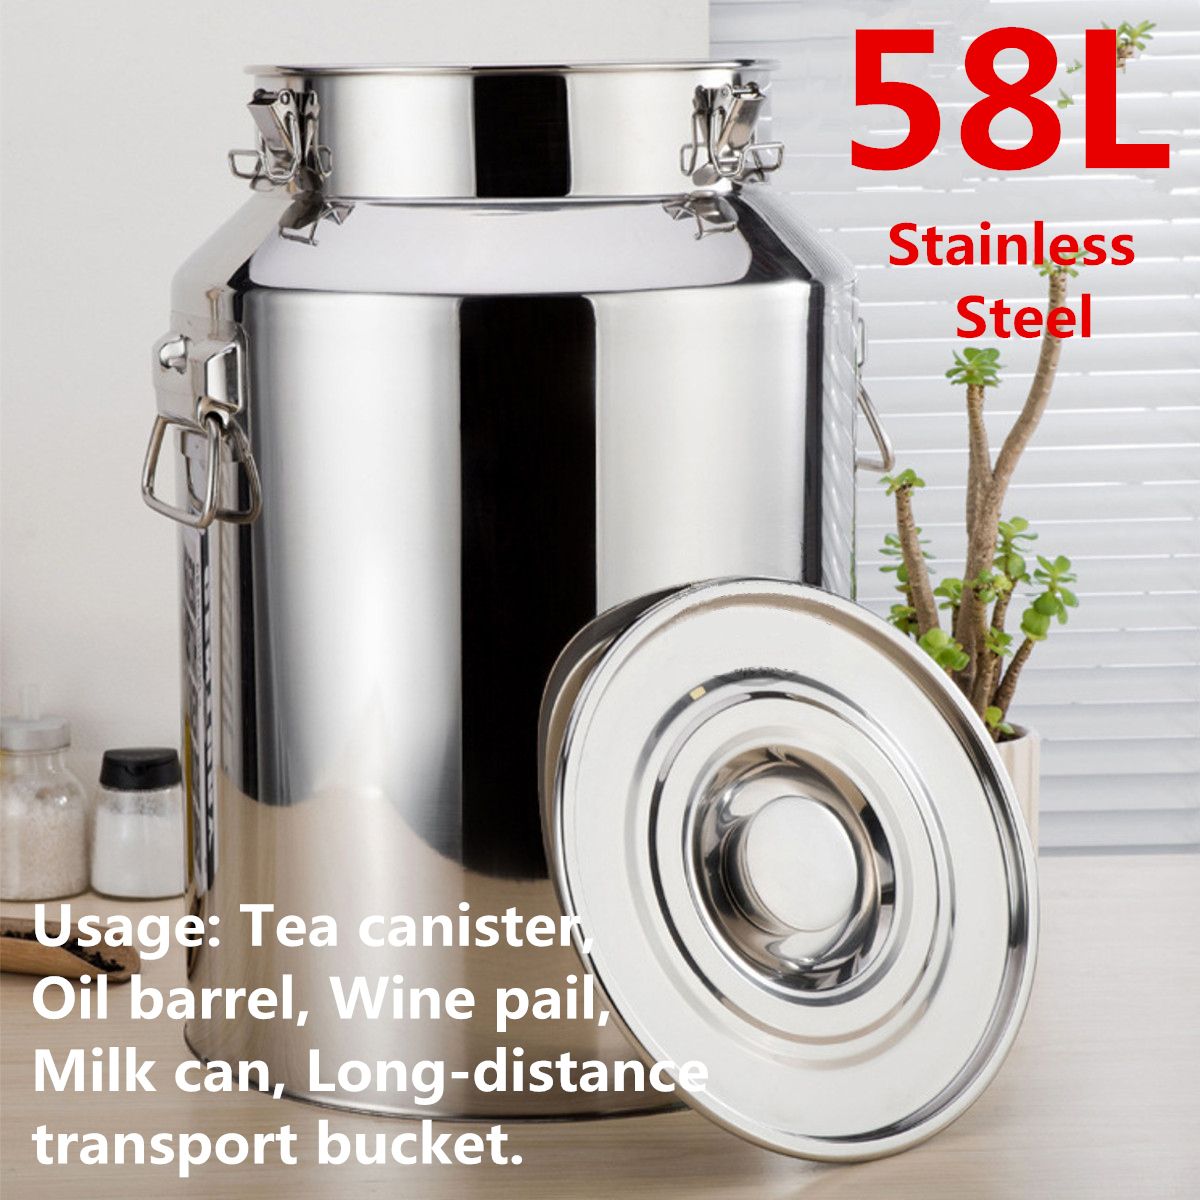 58L-35X60cm-Stainless-Steel-Milk-Can-Wine-Pail-Water-Bucket-Oil-Barrel-Tea-Canister-1324614